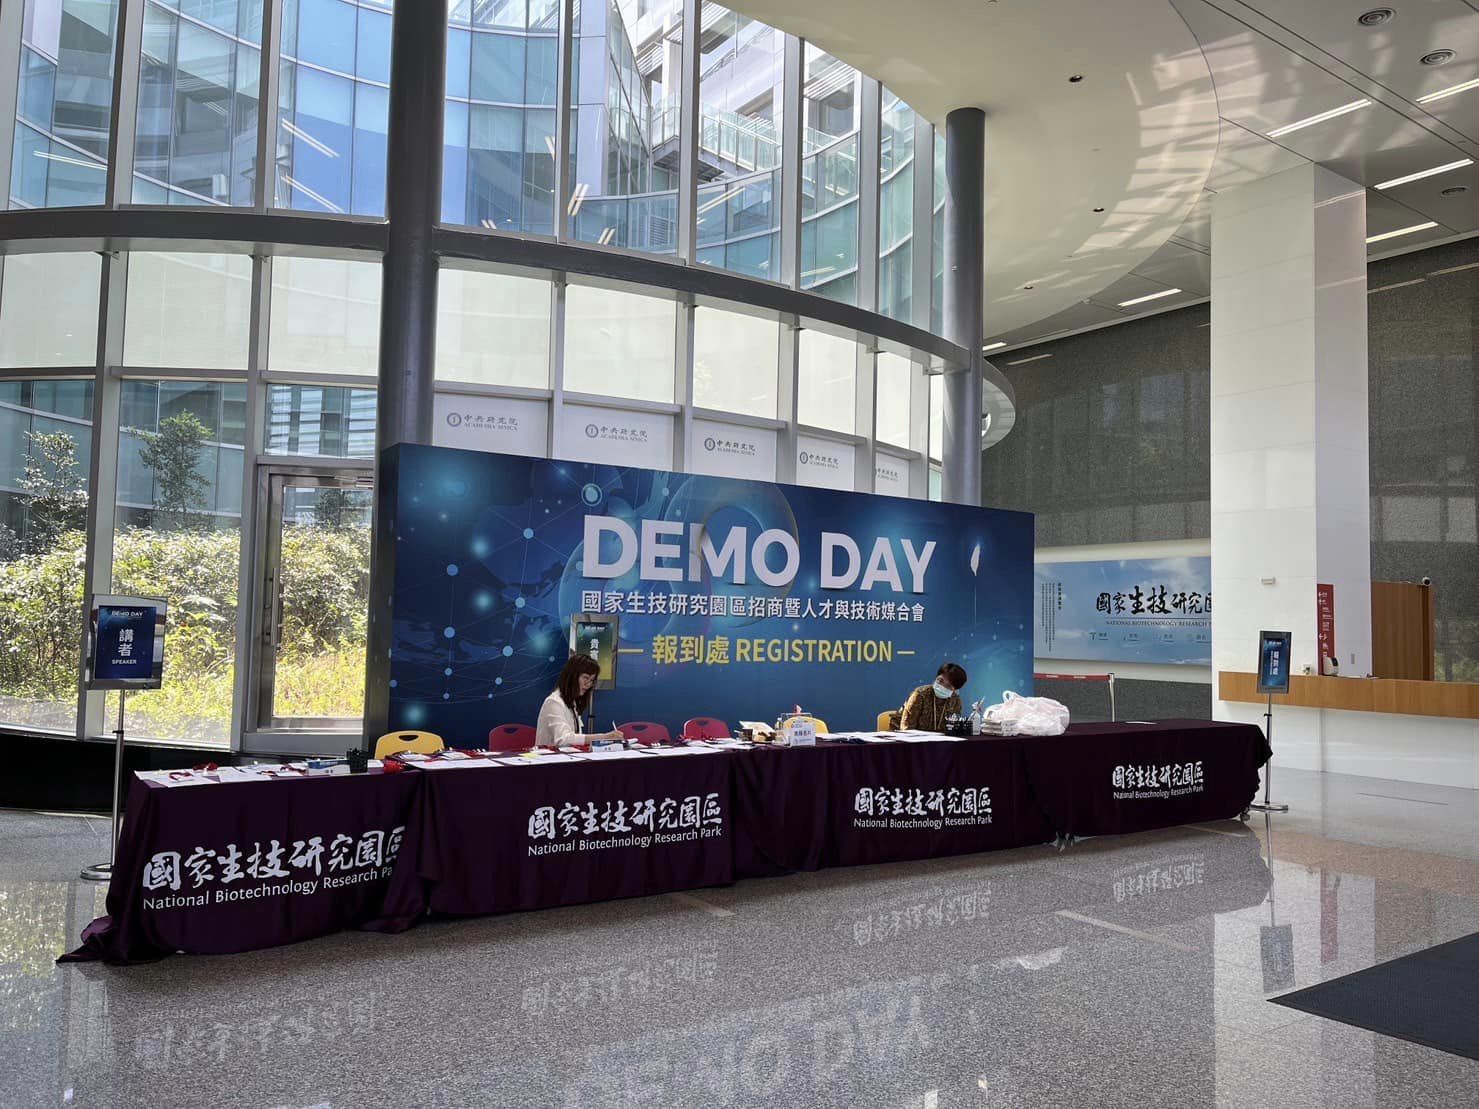 Demo Day